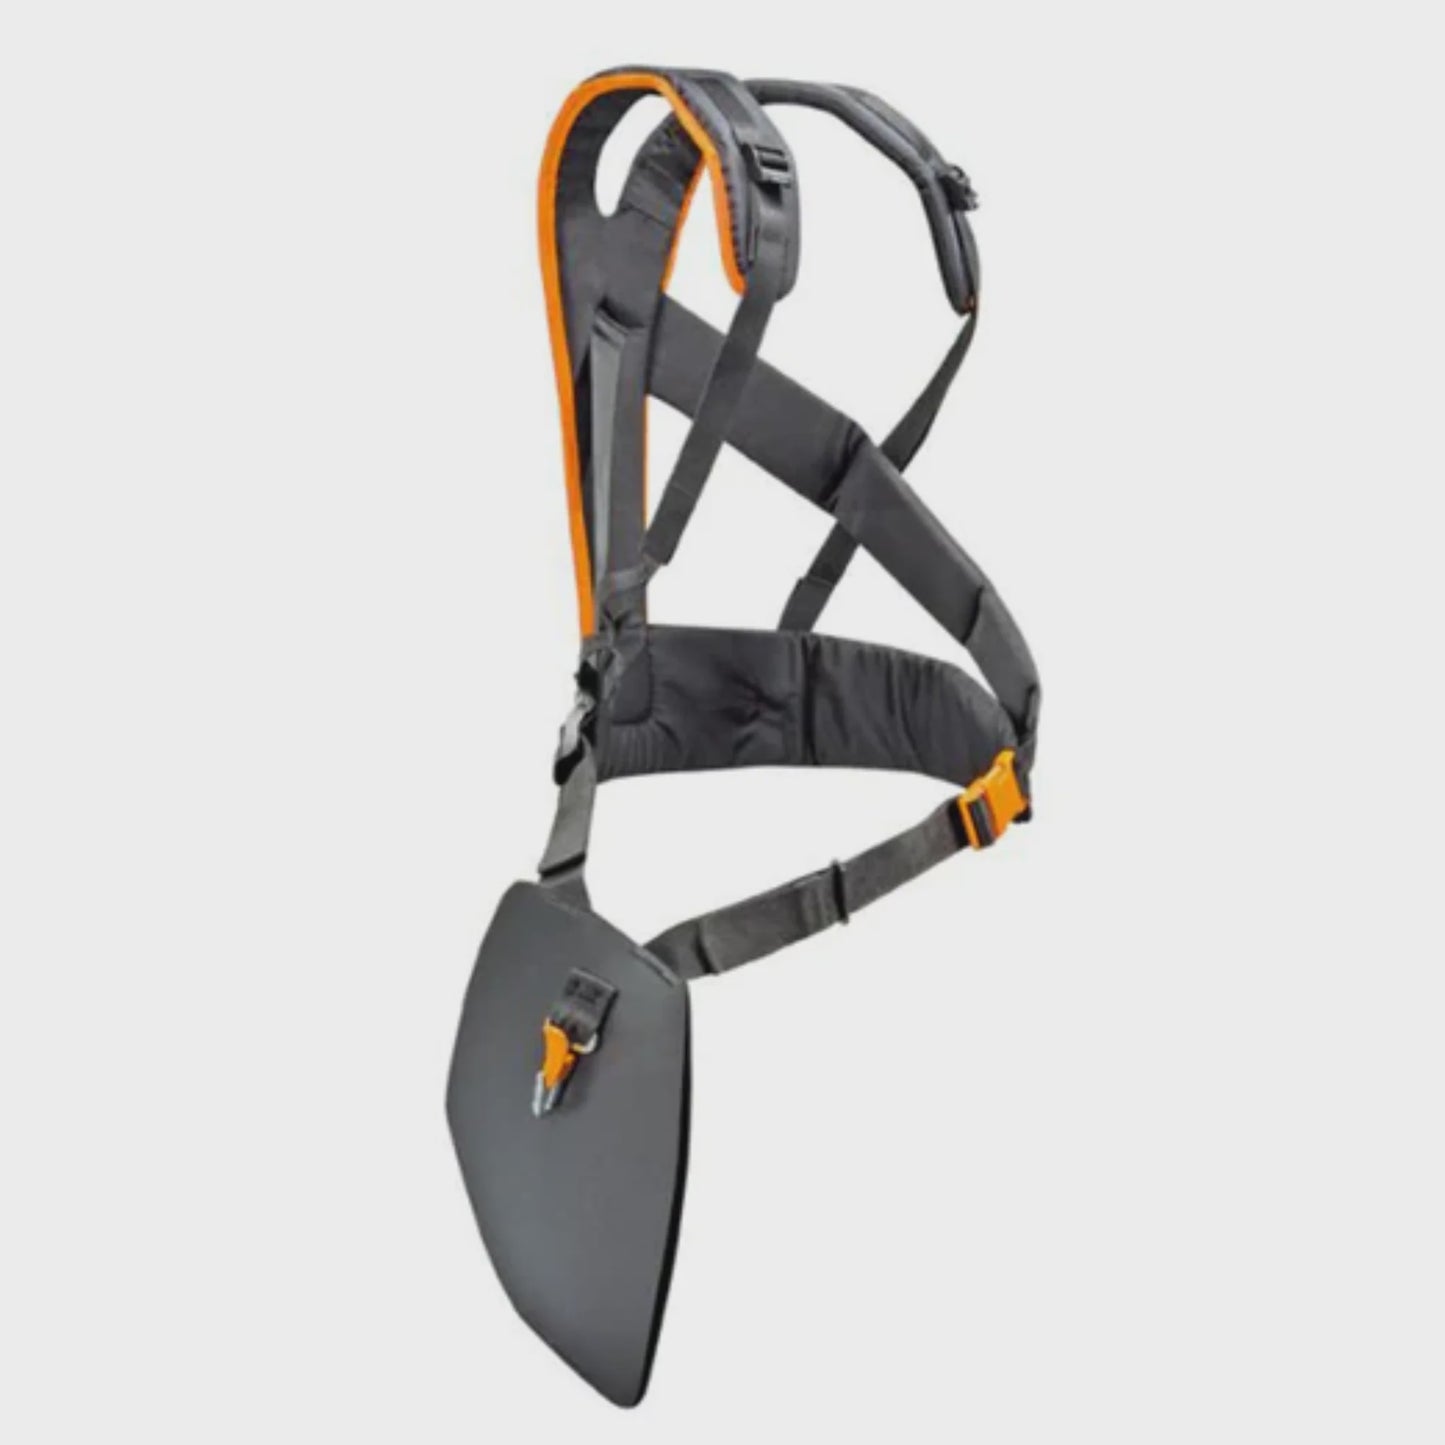 Stihl Universal Deluxe Double Shoulder Harness